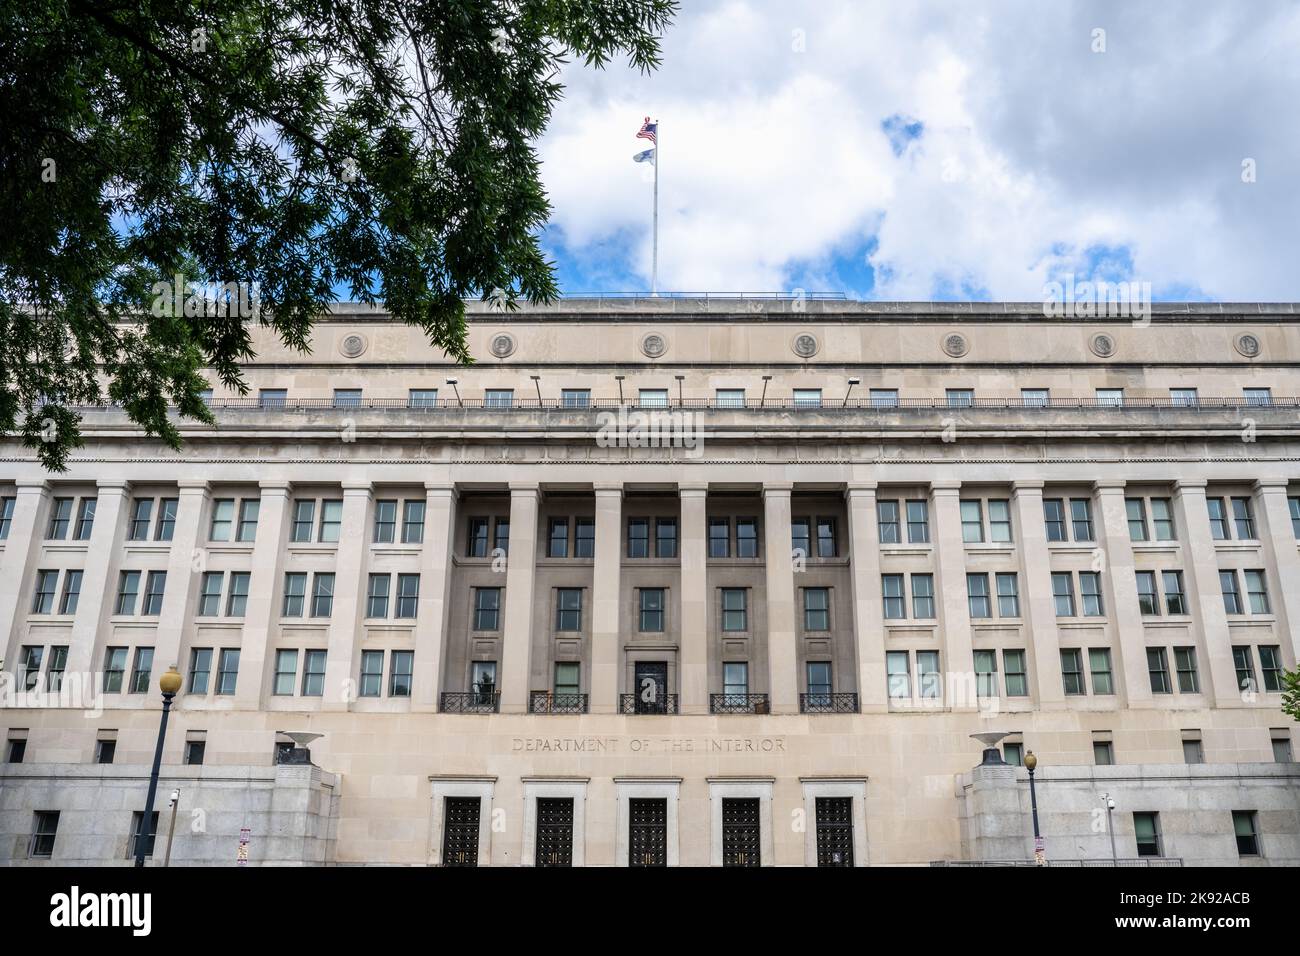 Washington, DC - Sept. 8, 2022: The Stewart Lee Udall building of the Department of the Interior was built in 1936 under President Franklin D. Rooseve Stock Photo